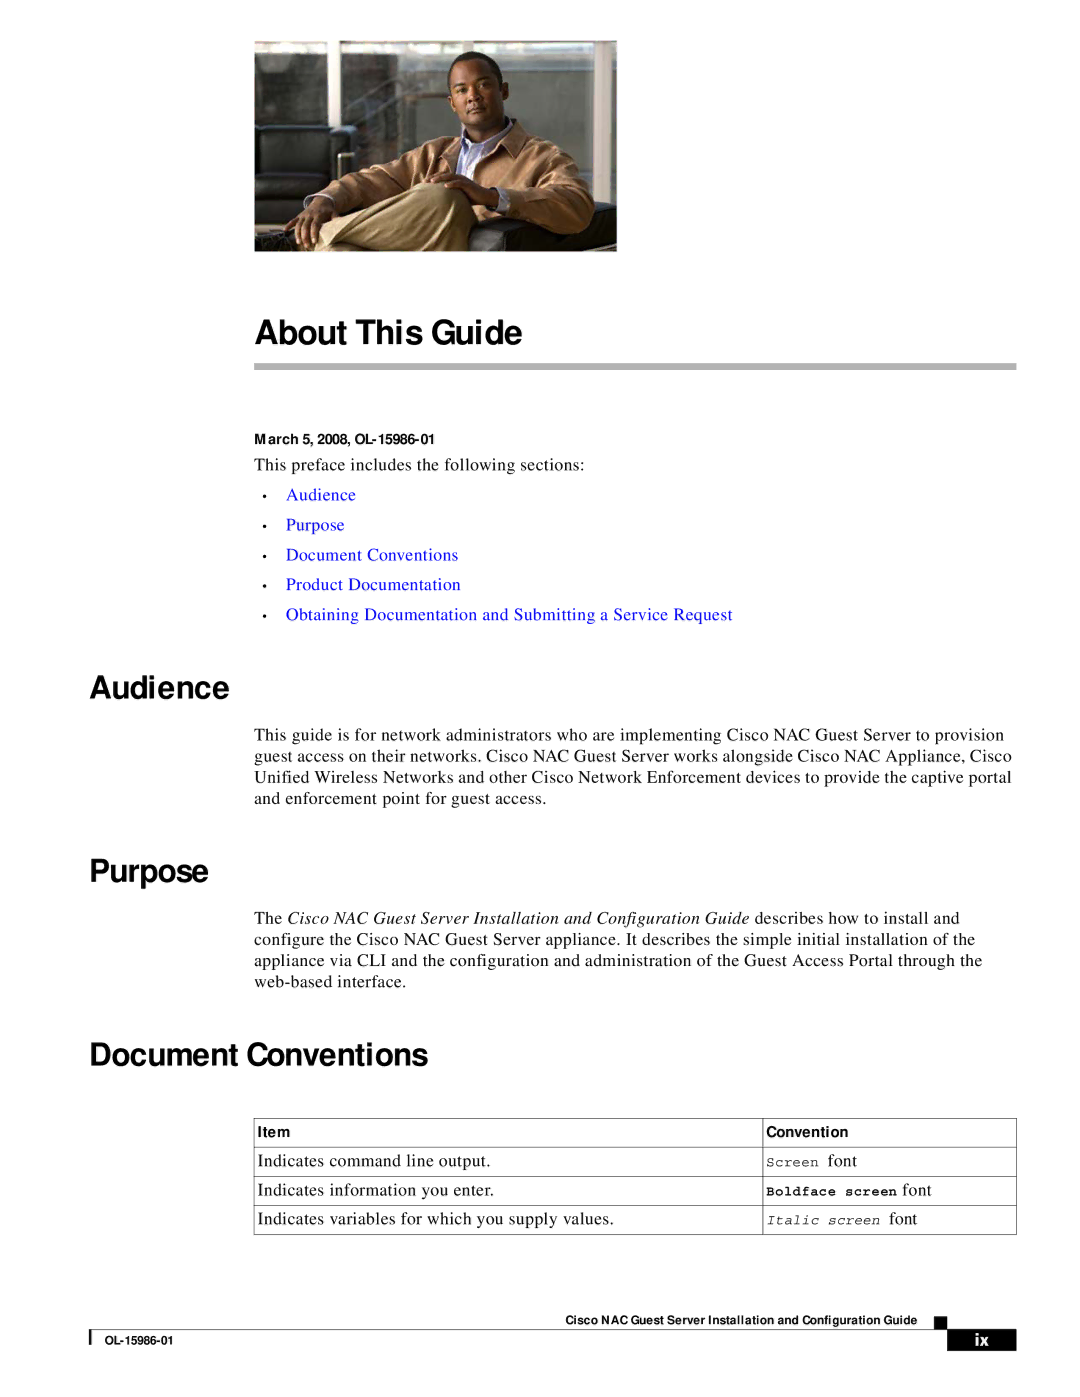 Cisco Systems OL-15986-01 manual About This Guide, Audience, Purpose, Document Conventions 